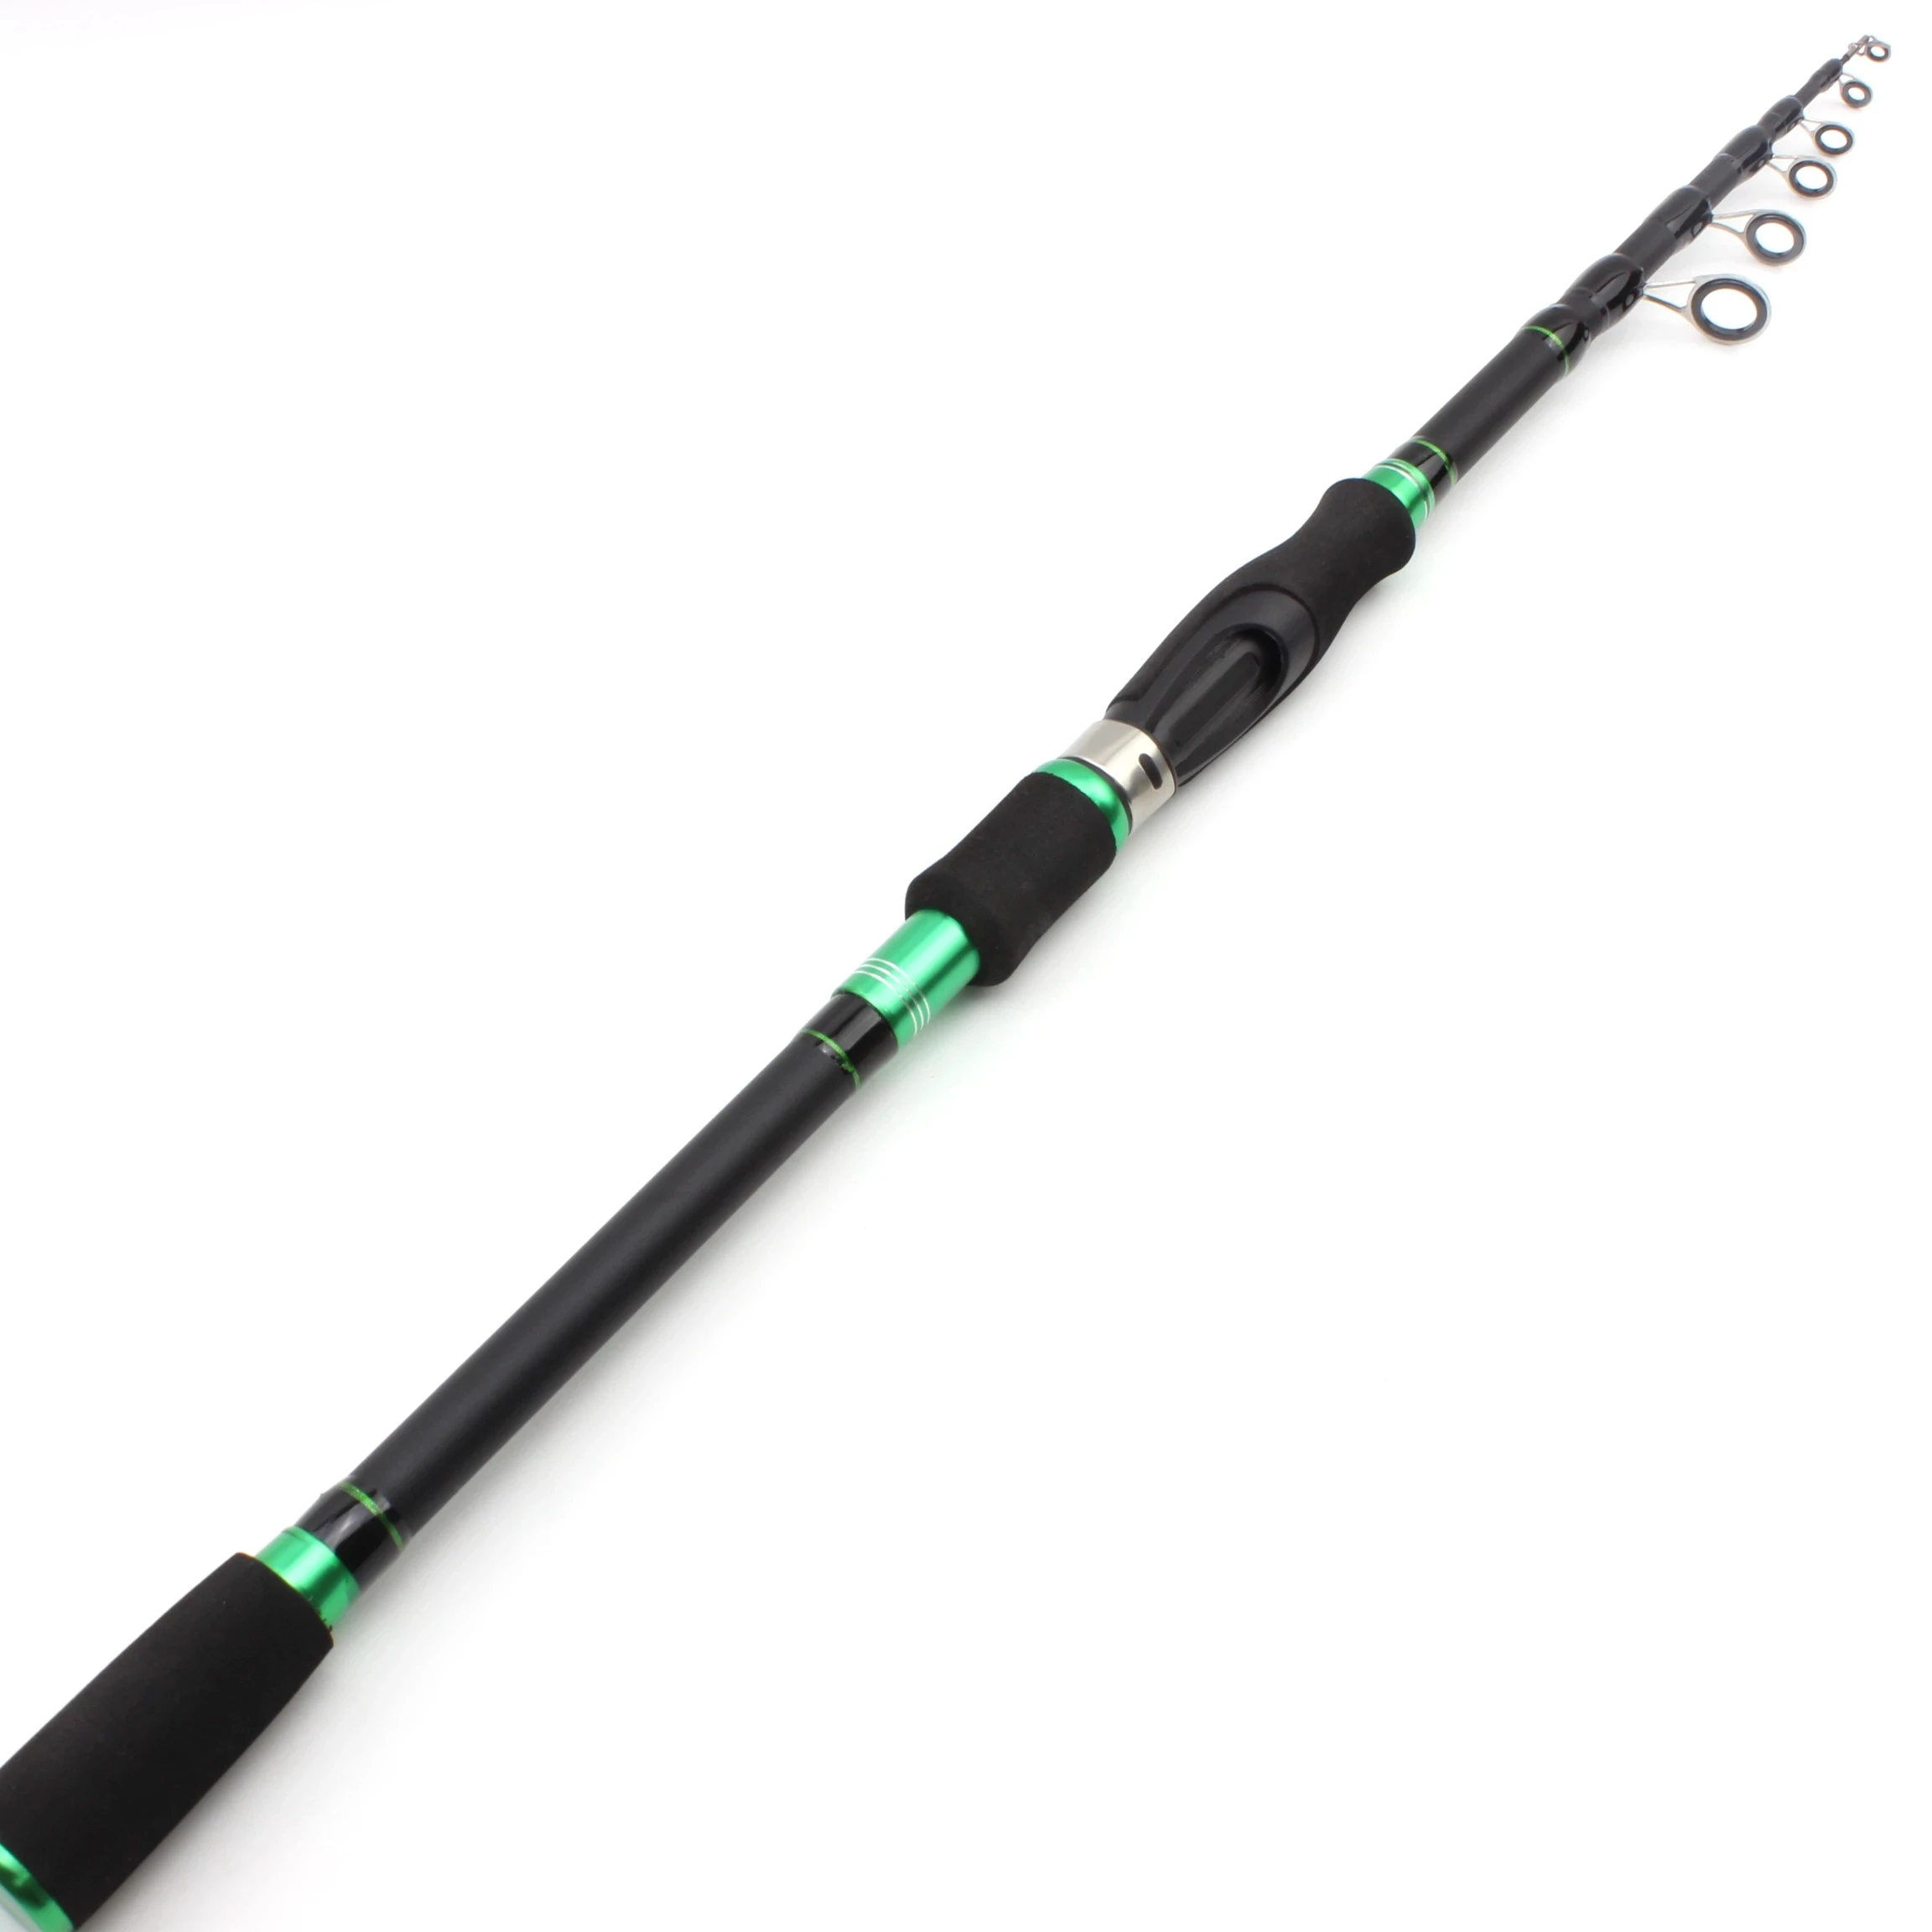 

NEW 1.8m2.1m2.4m2.7m lure pole Portable Telescopic Fishing Rod carbon rod M power Spinning Rod Pole Lure Weight 7-28g pesca